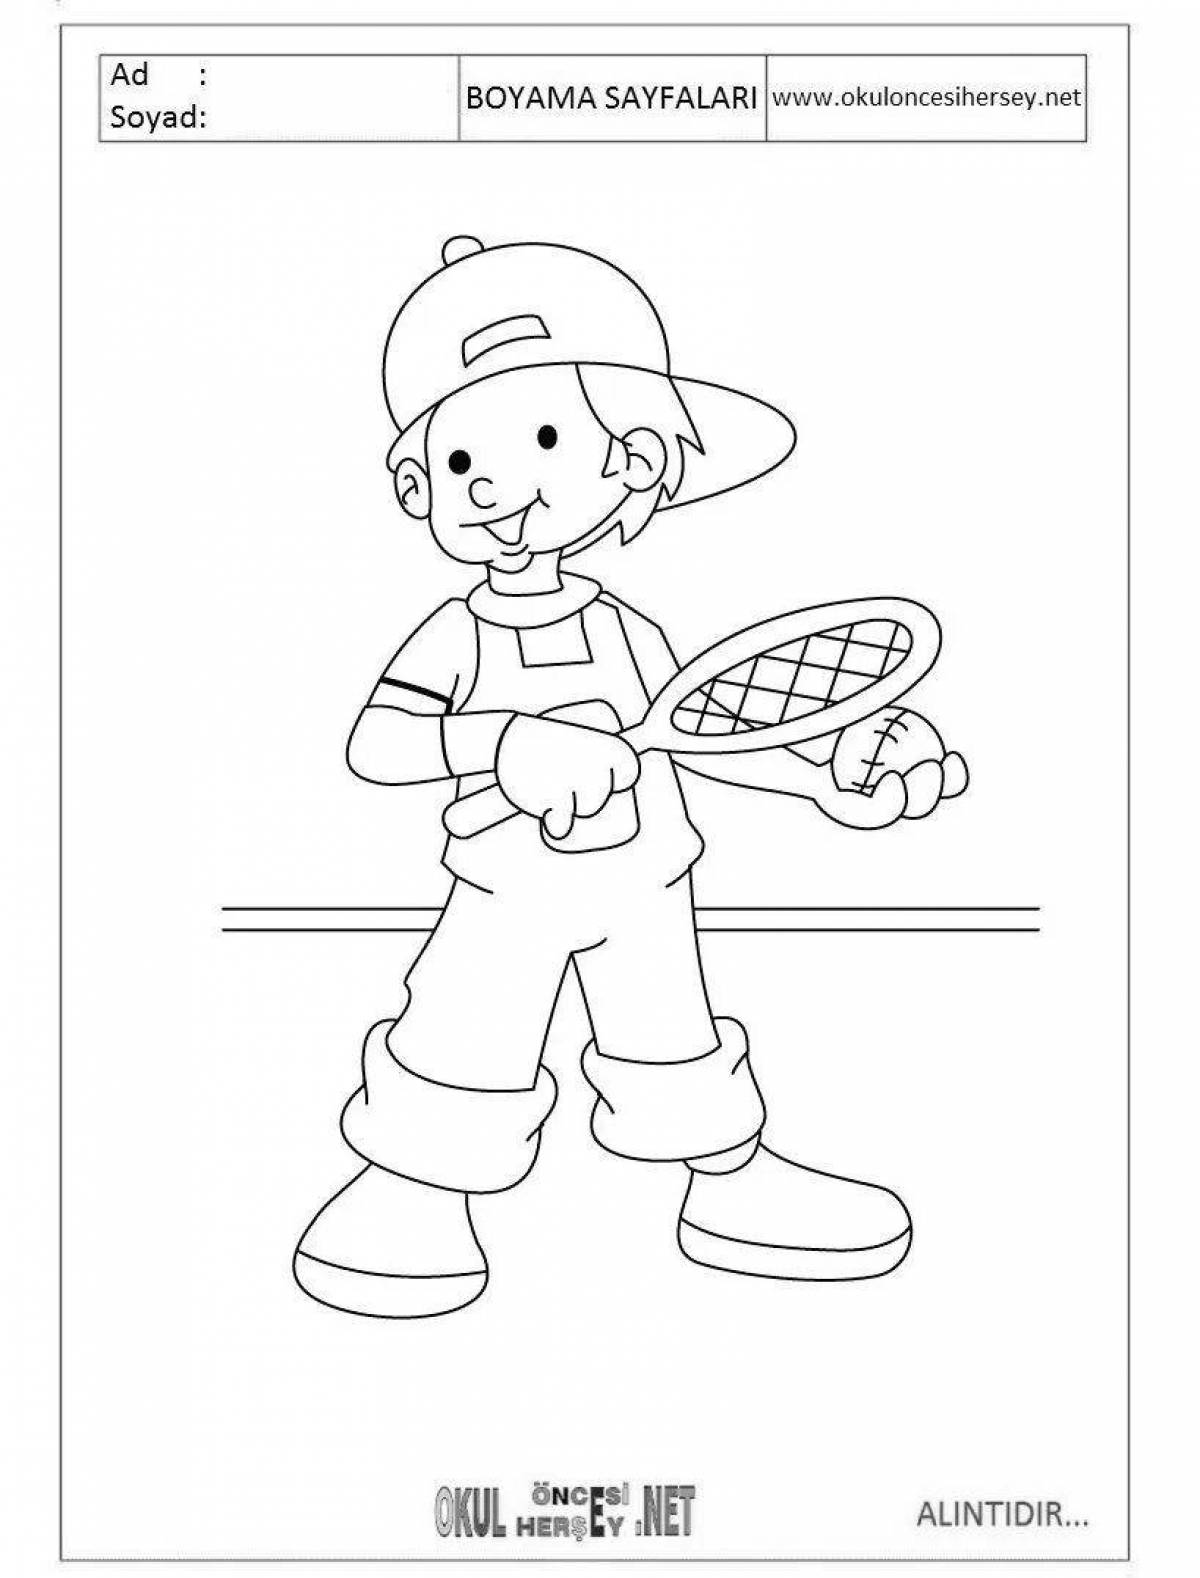 Entertaining sports coloring book for children 3-4 years old